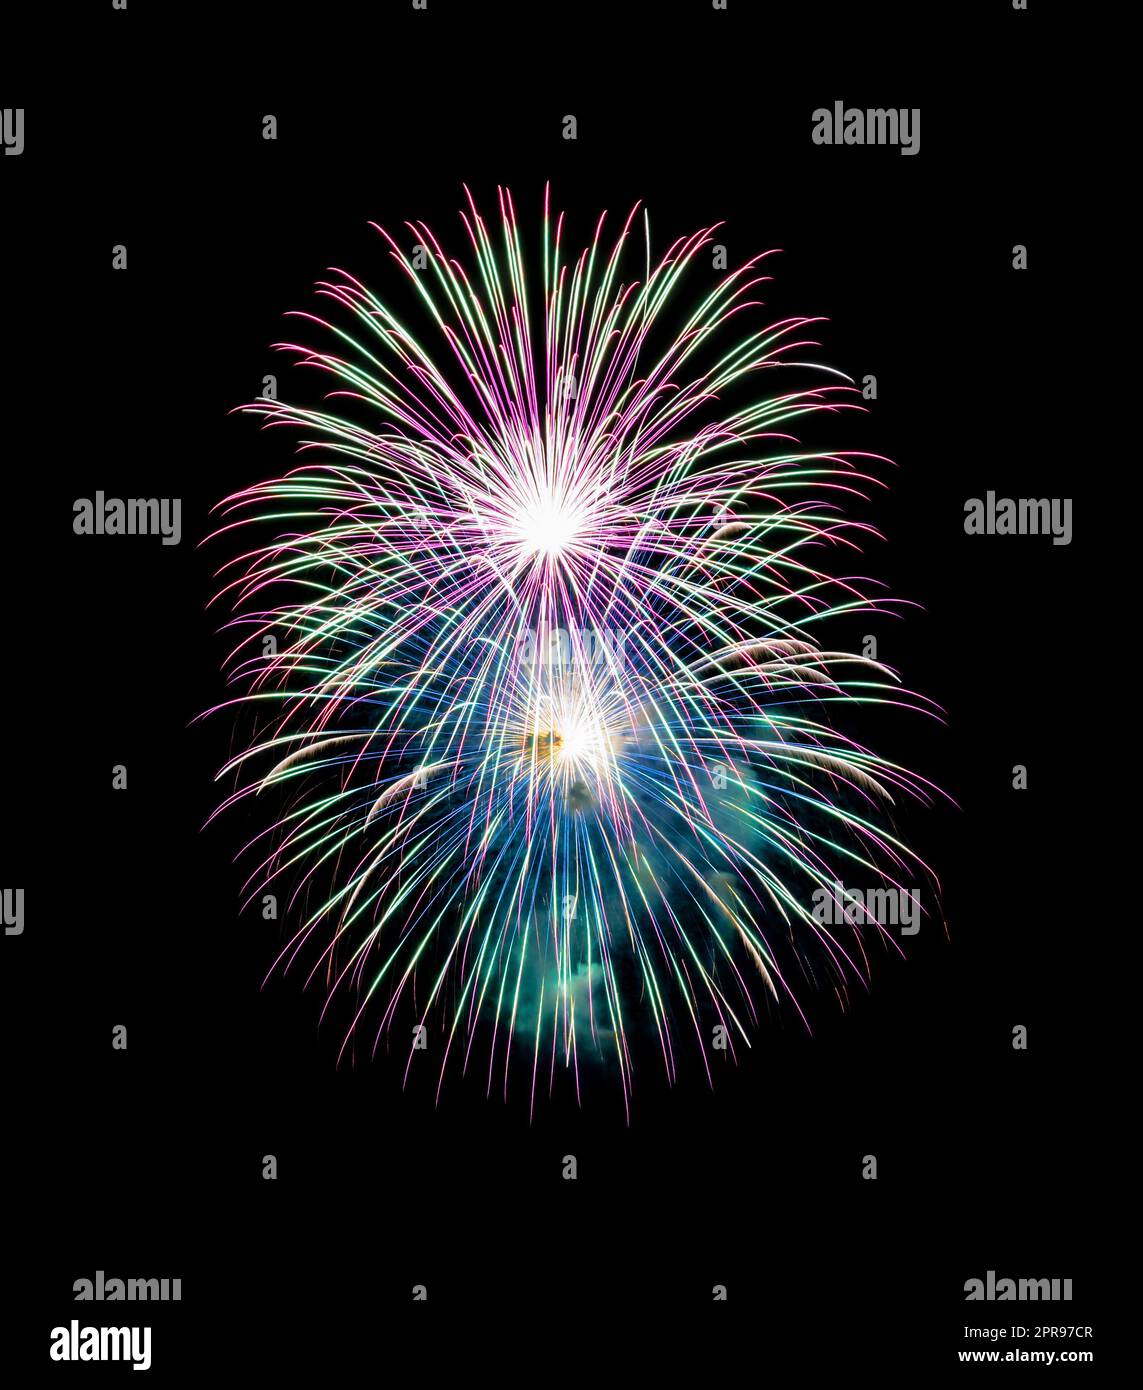 Brightly colorful fireworks in the night sky Stock Photo